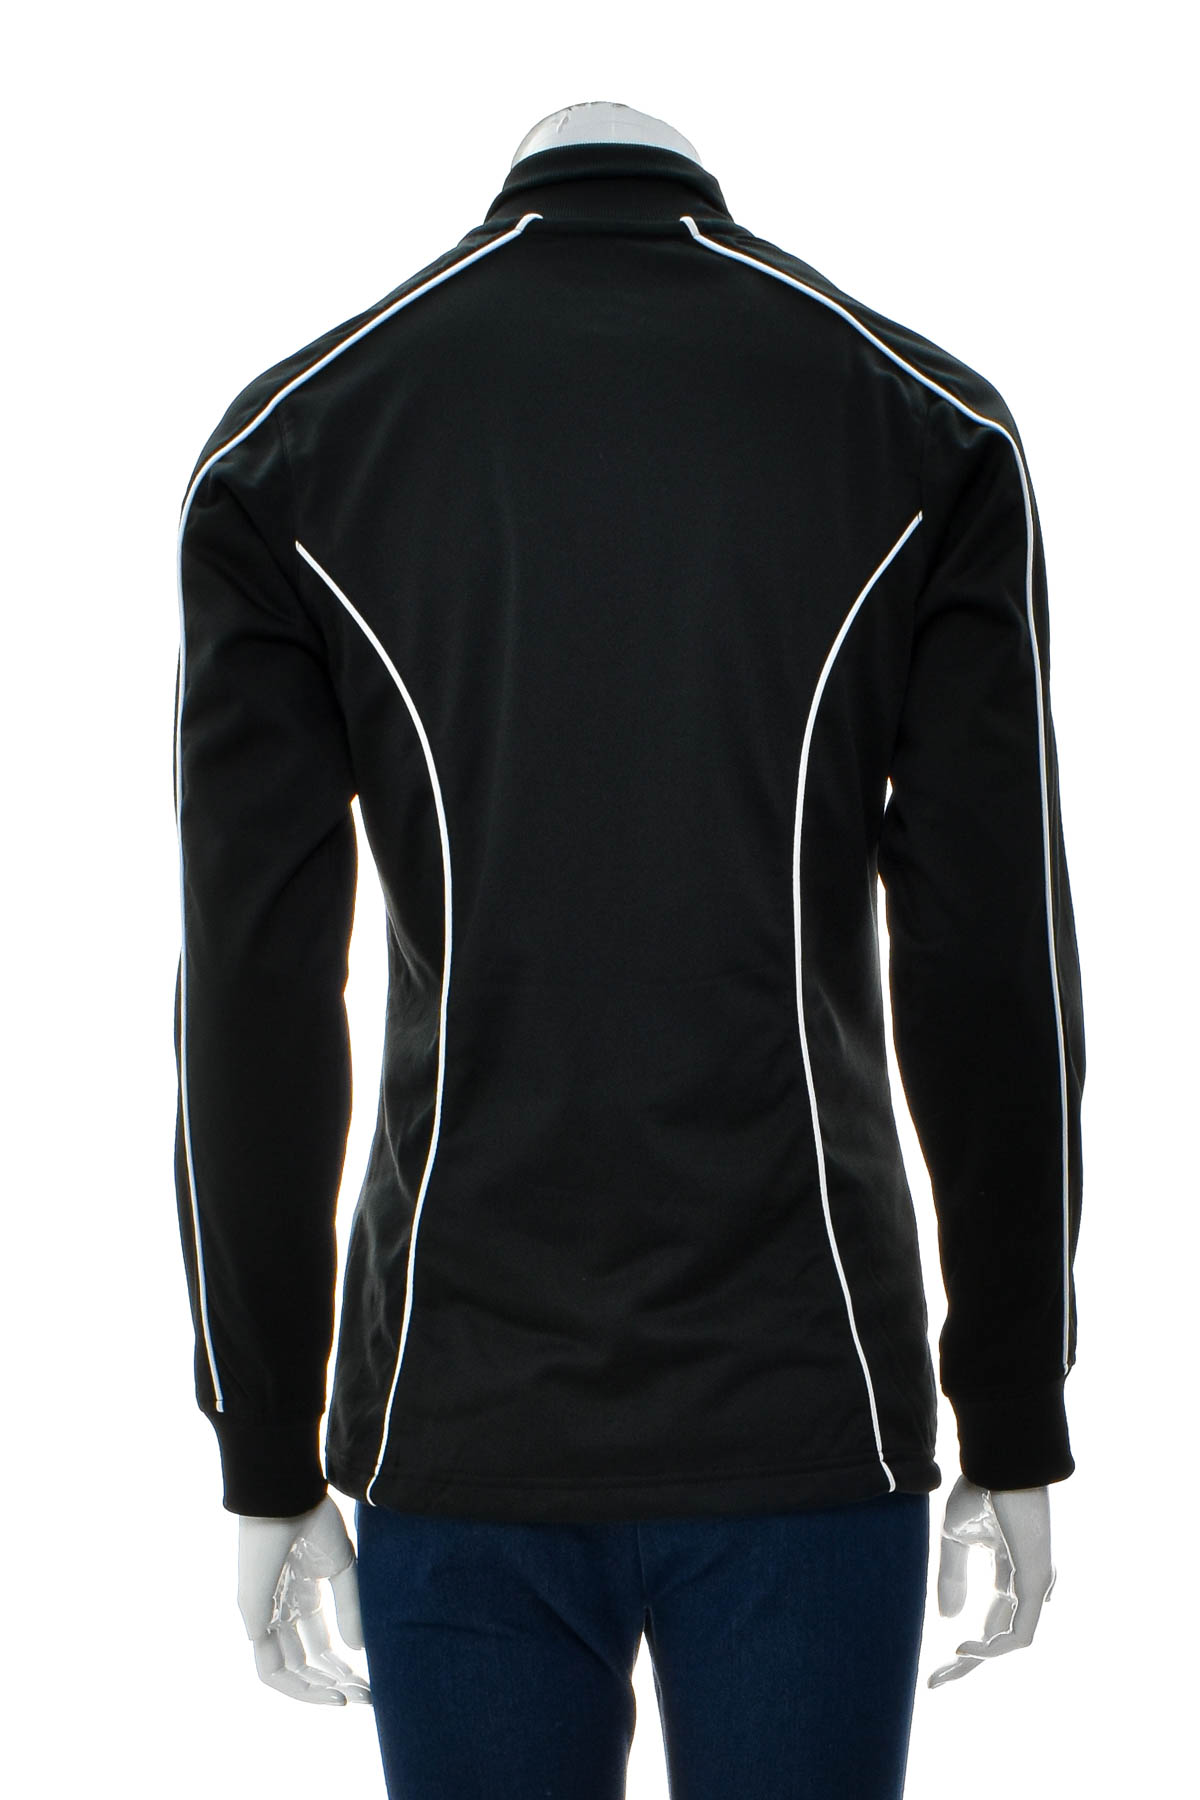 Female sports top - CHARLES RIVER APPAREL - 1